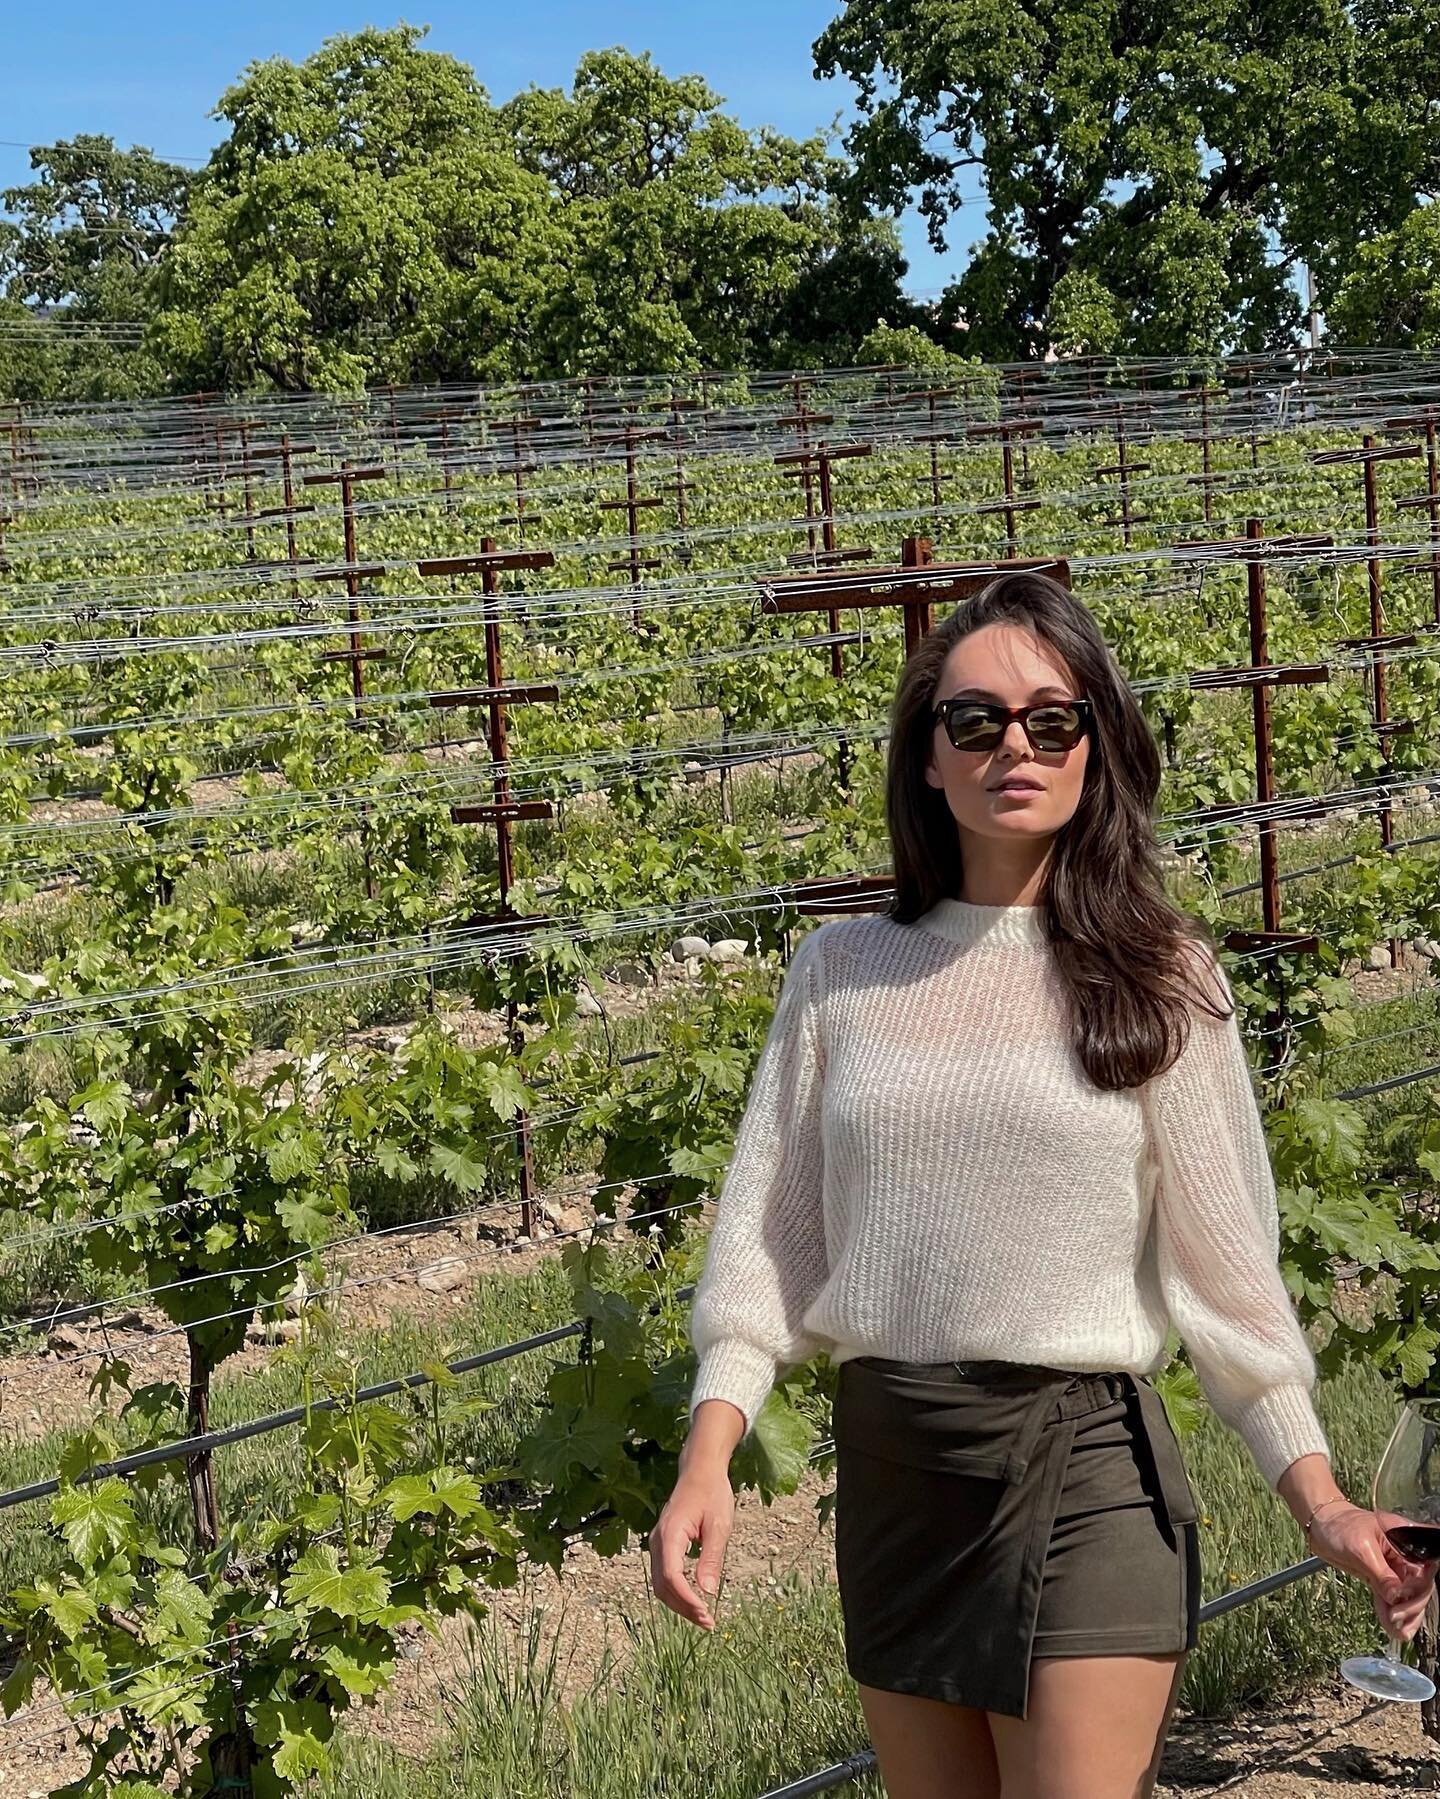 Do I want a glass of wine? You bet Shiraz I do! 🍷
-
-
Wearing one of my favorite spring-transitional sweaters by @margaretoleary with boots by @vincecamuto and sunnies by @jacquesmariemage
&bull;
&bull;
&bull;
&bull;
&bull;
#springoutfit #wineoclock